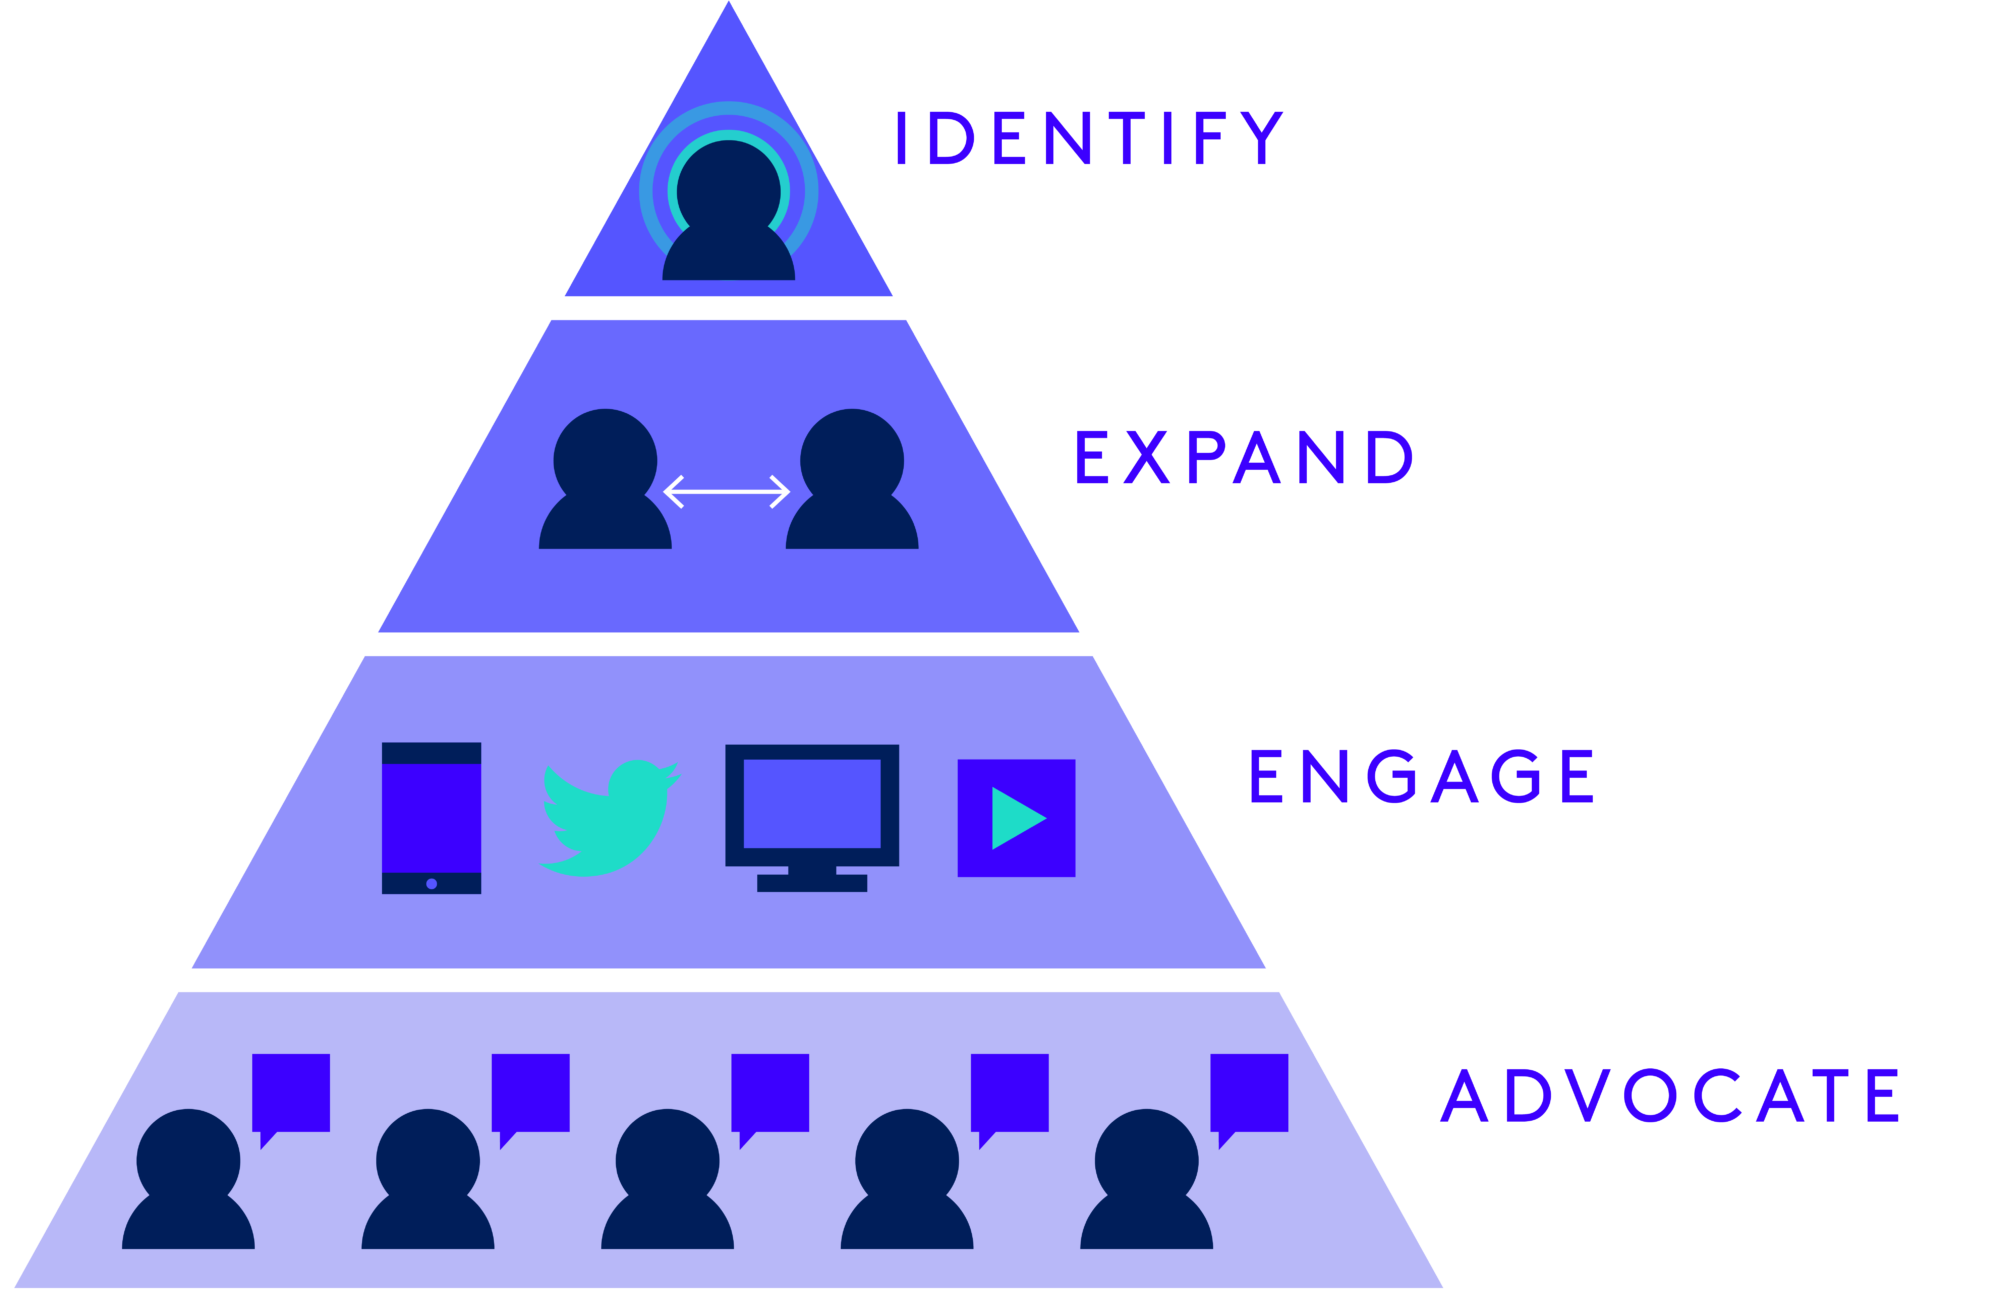 Diagram Pyramid witt 4 sections which is wide at the bottom and has a point at the top. The 1st bottom section is titled "Advocate" with the shape of a person with a speech bubble. The 2nd lower middle section is titled "Engage" and includes a phone, compute, the twitter bird and a play button. The 3rd upper middle section is titled "Expand" and has two people with an double sided arrow connecting them. The 4th top section (point of the pyramid) is titles "Identify" and shows a person with rings around them. 